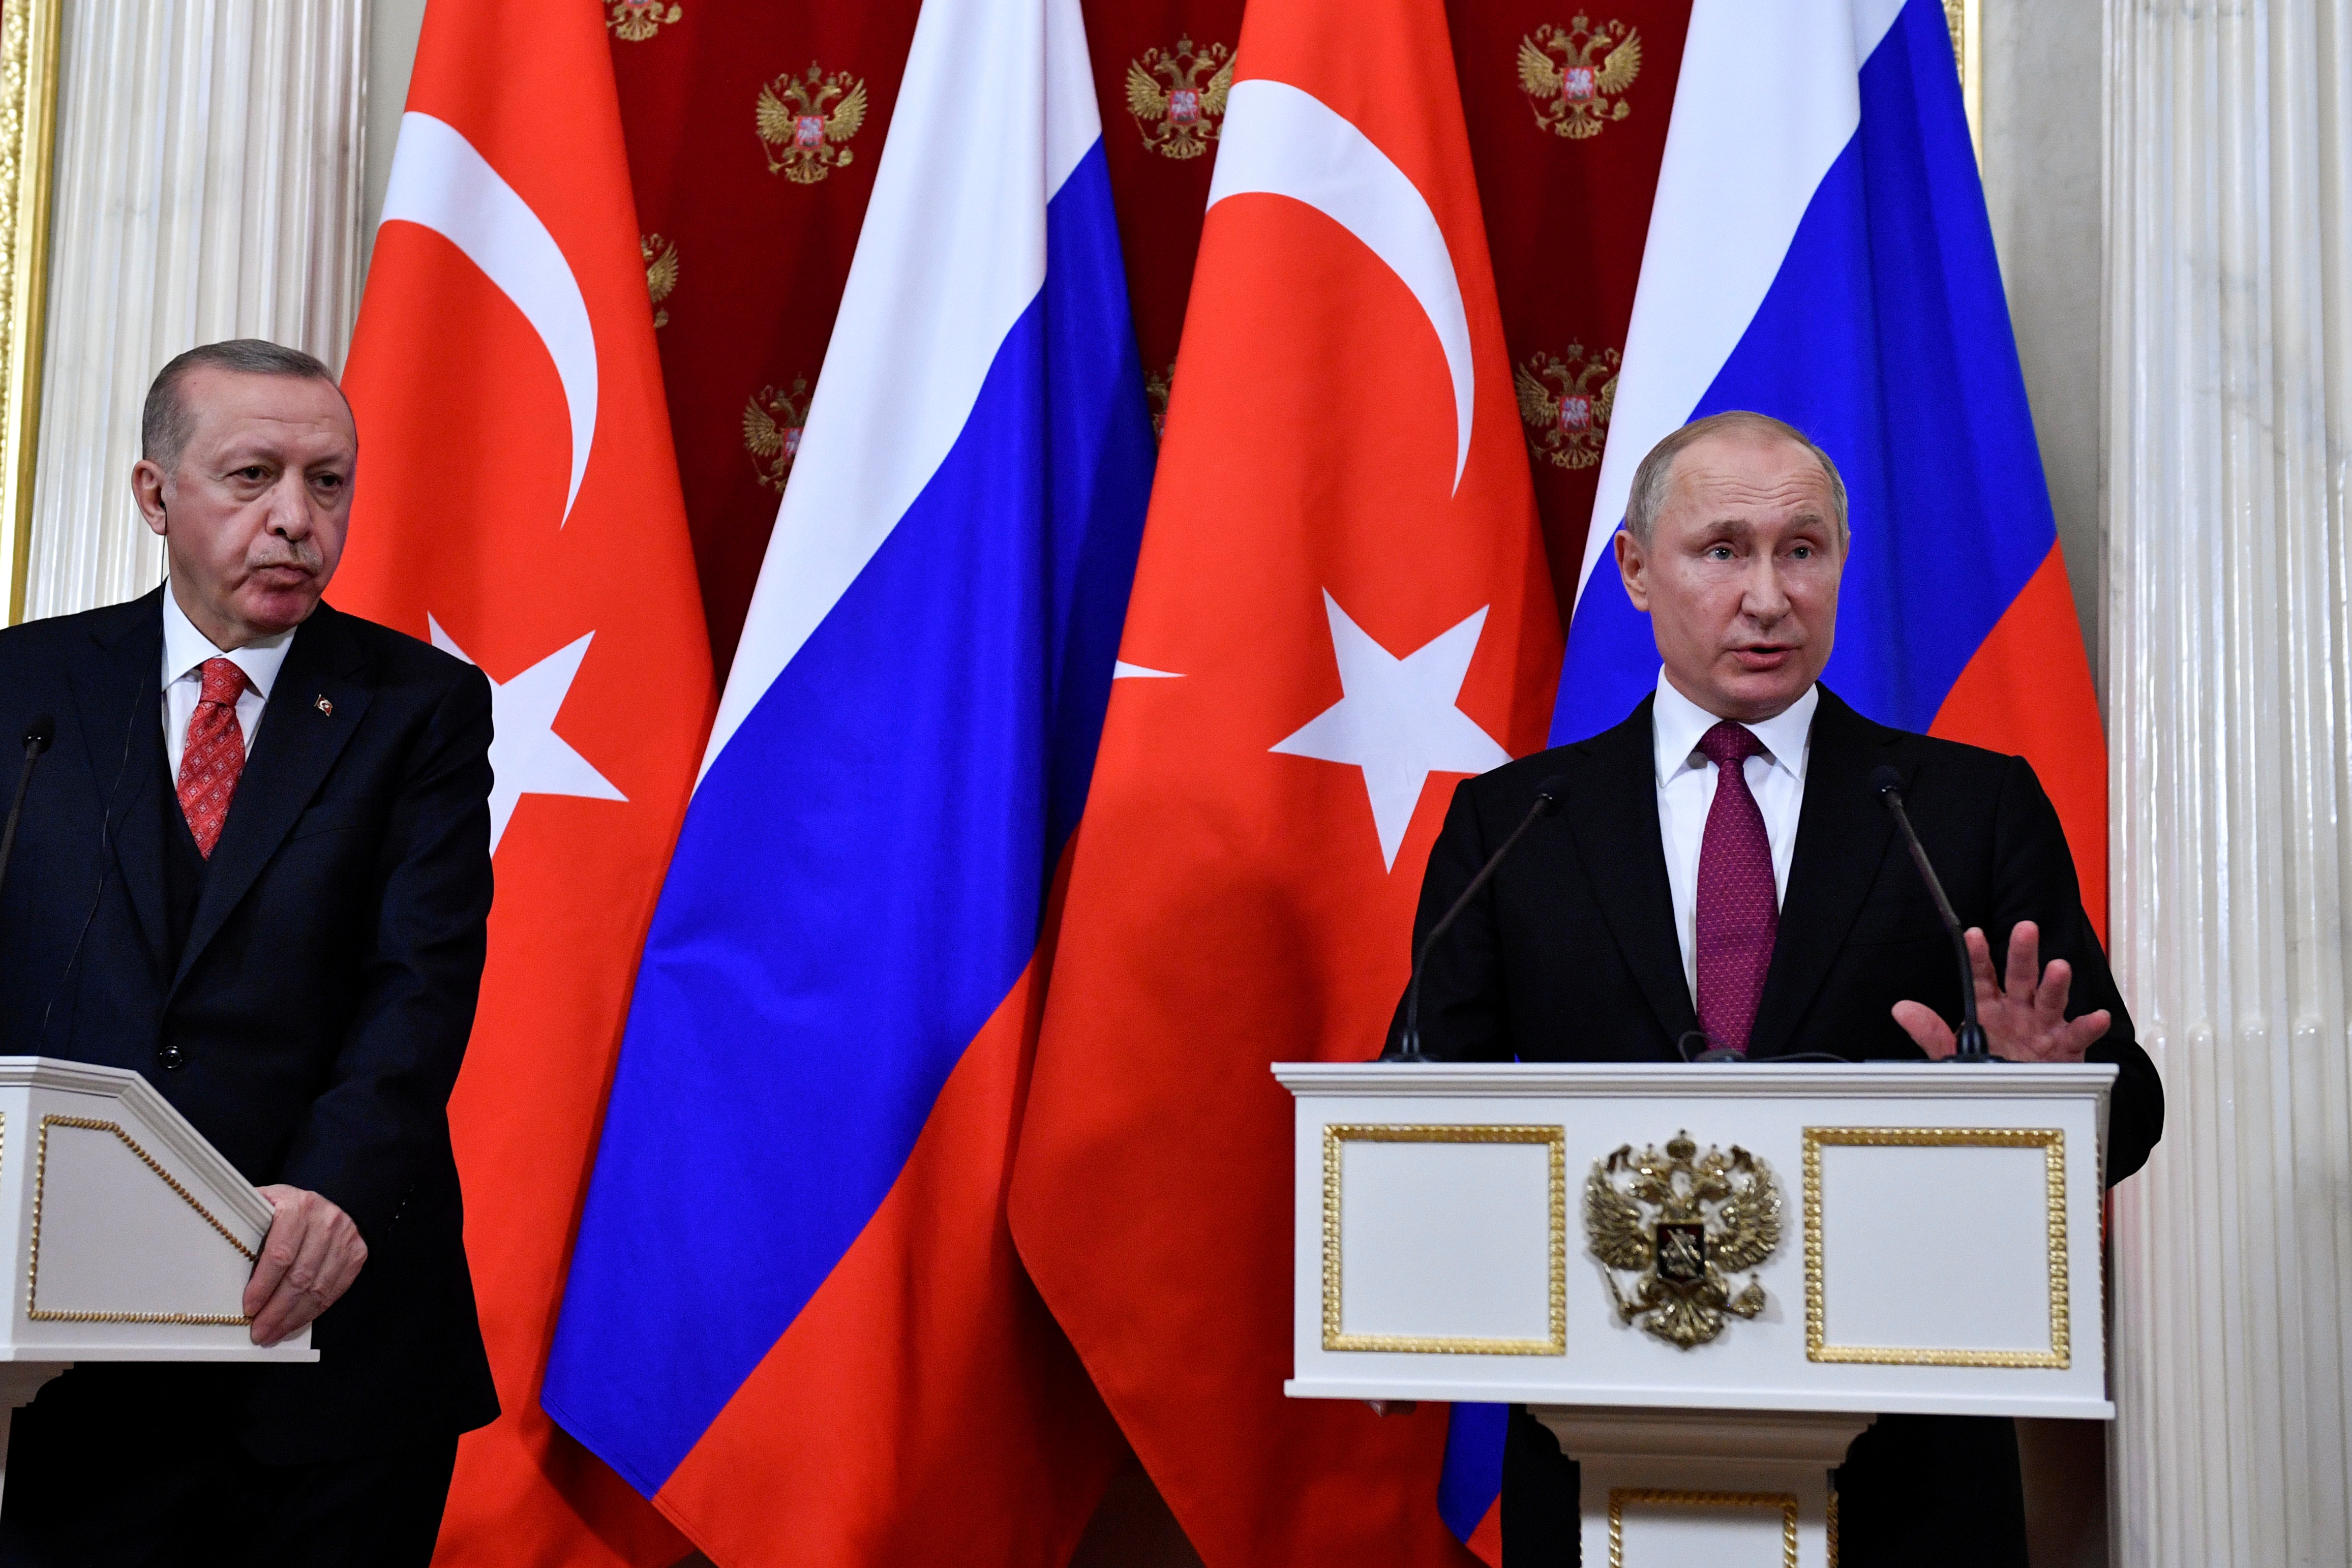 Russian President Putin meets with his Turkish counterpart Erdogan in Moscow